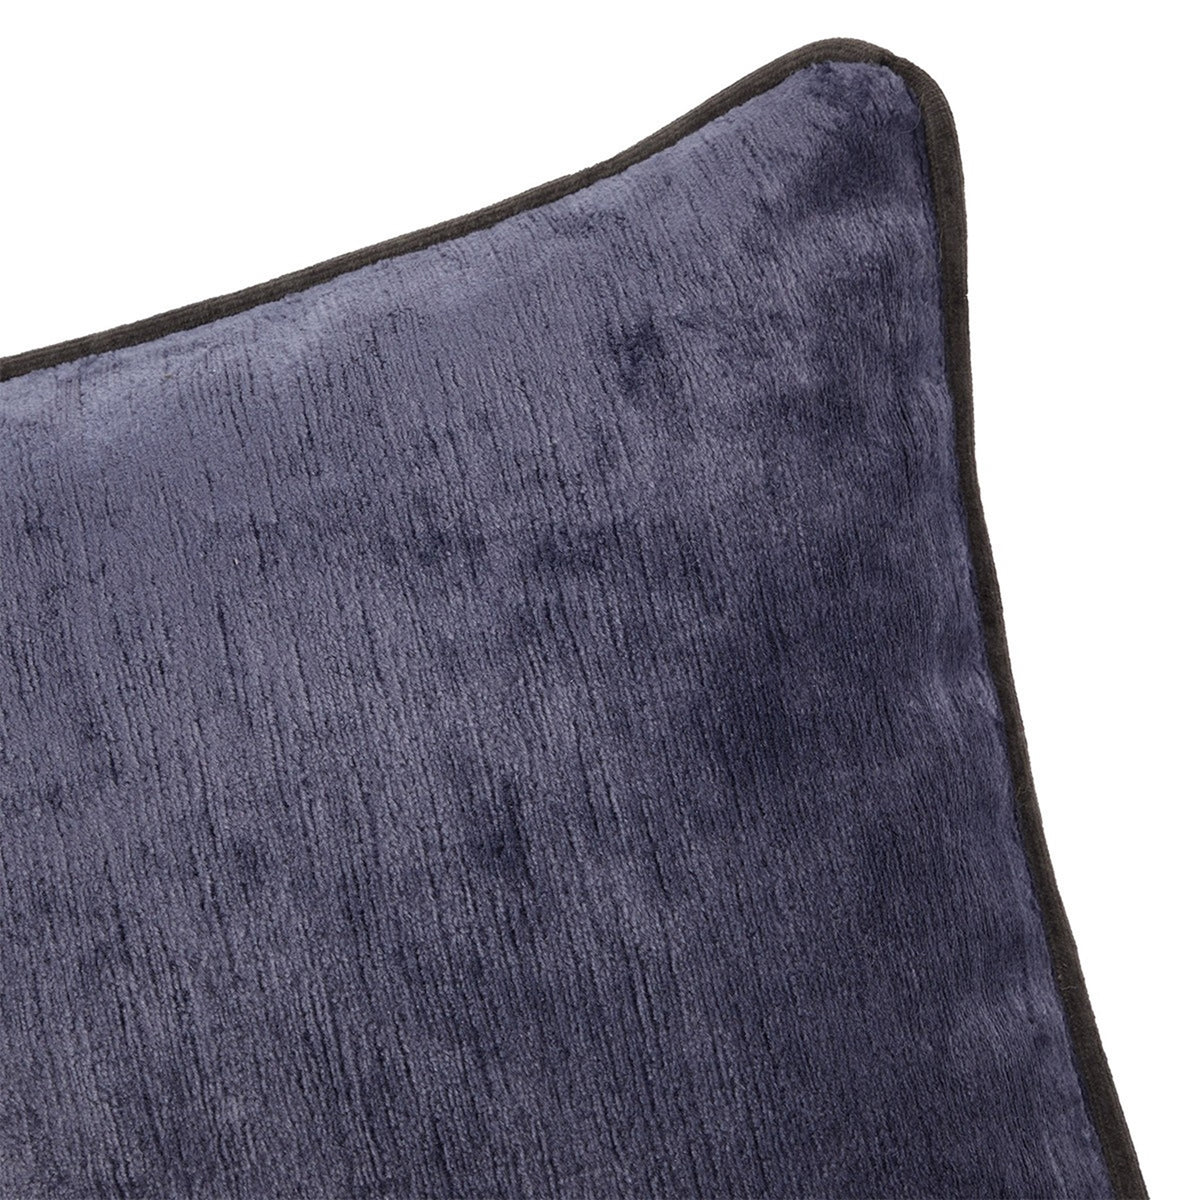 Close Up Image of Yves Delorme Iosis Boromee Decorative Pillow in Encre Color